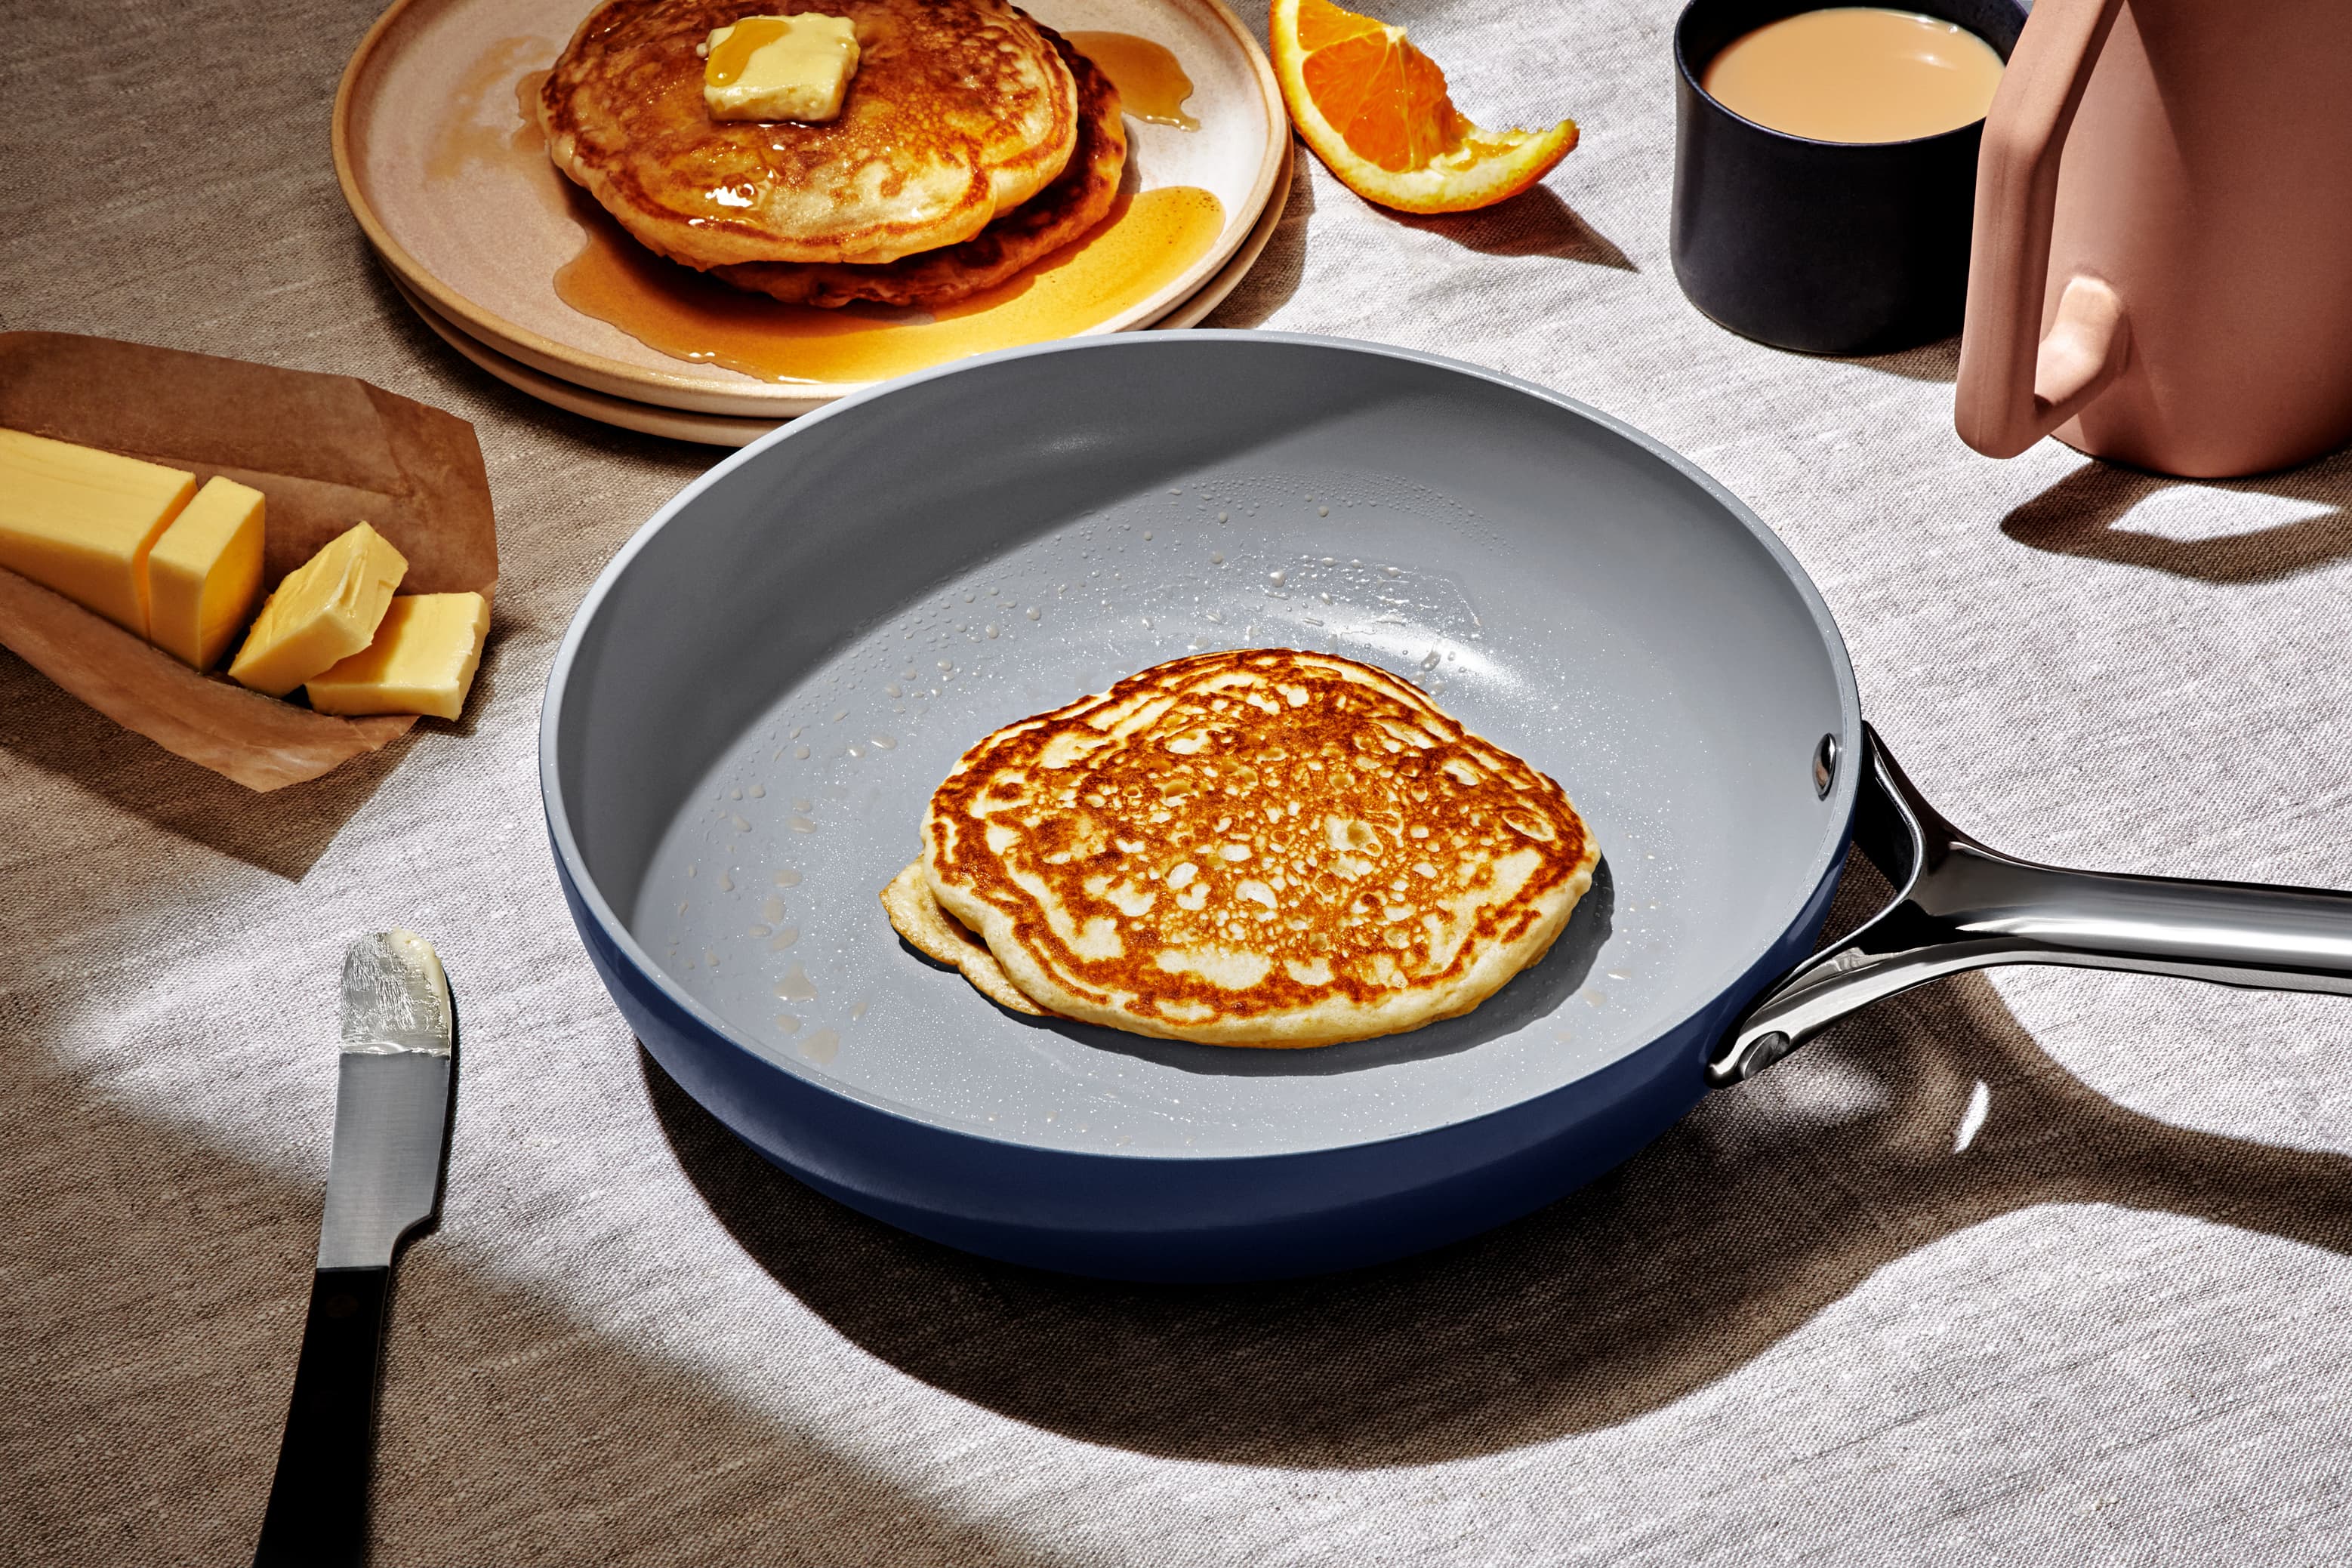 Caraway Cookware Now Available at West Elm